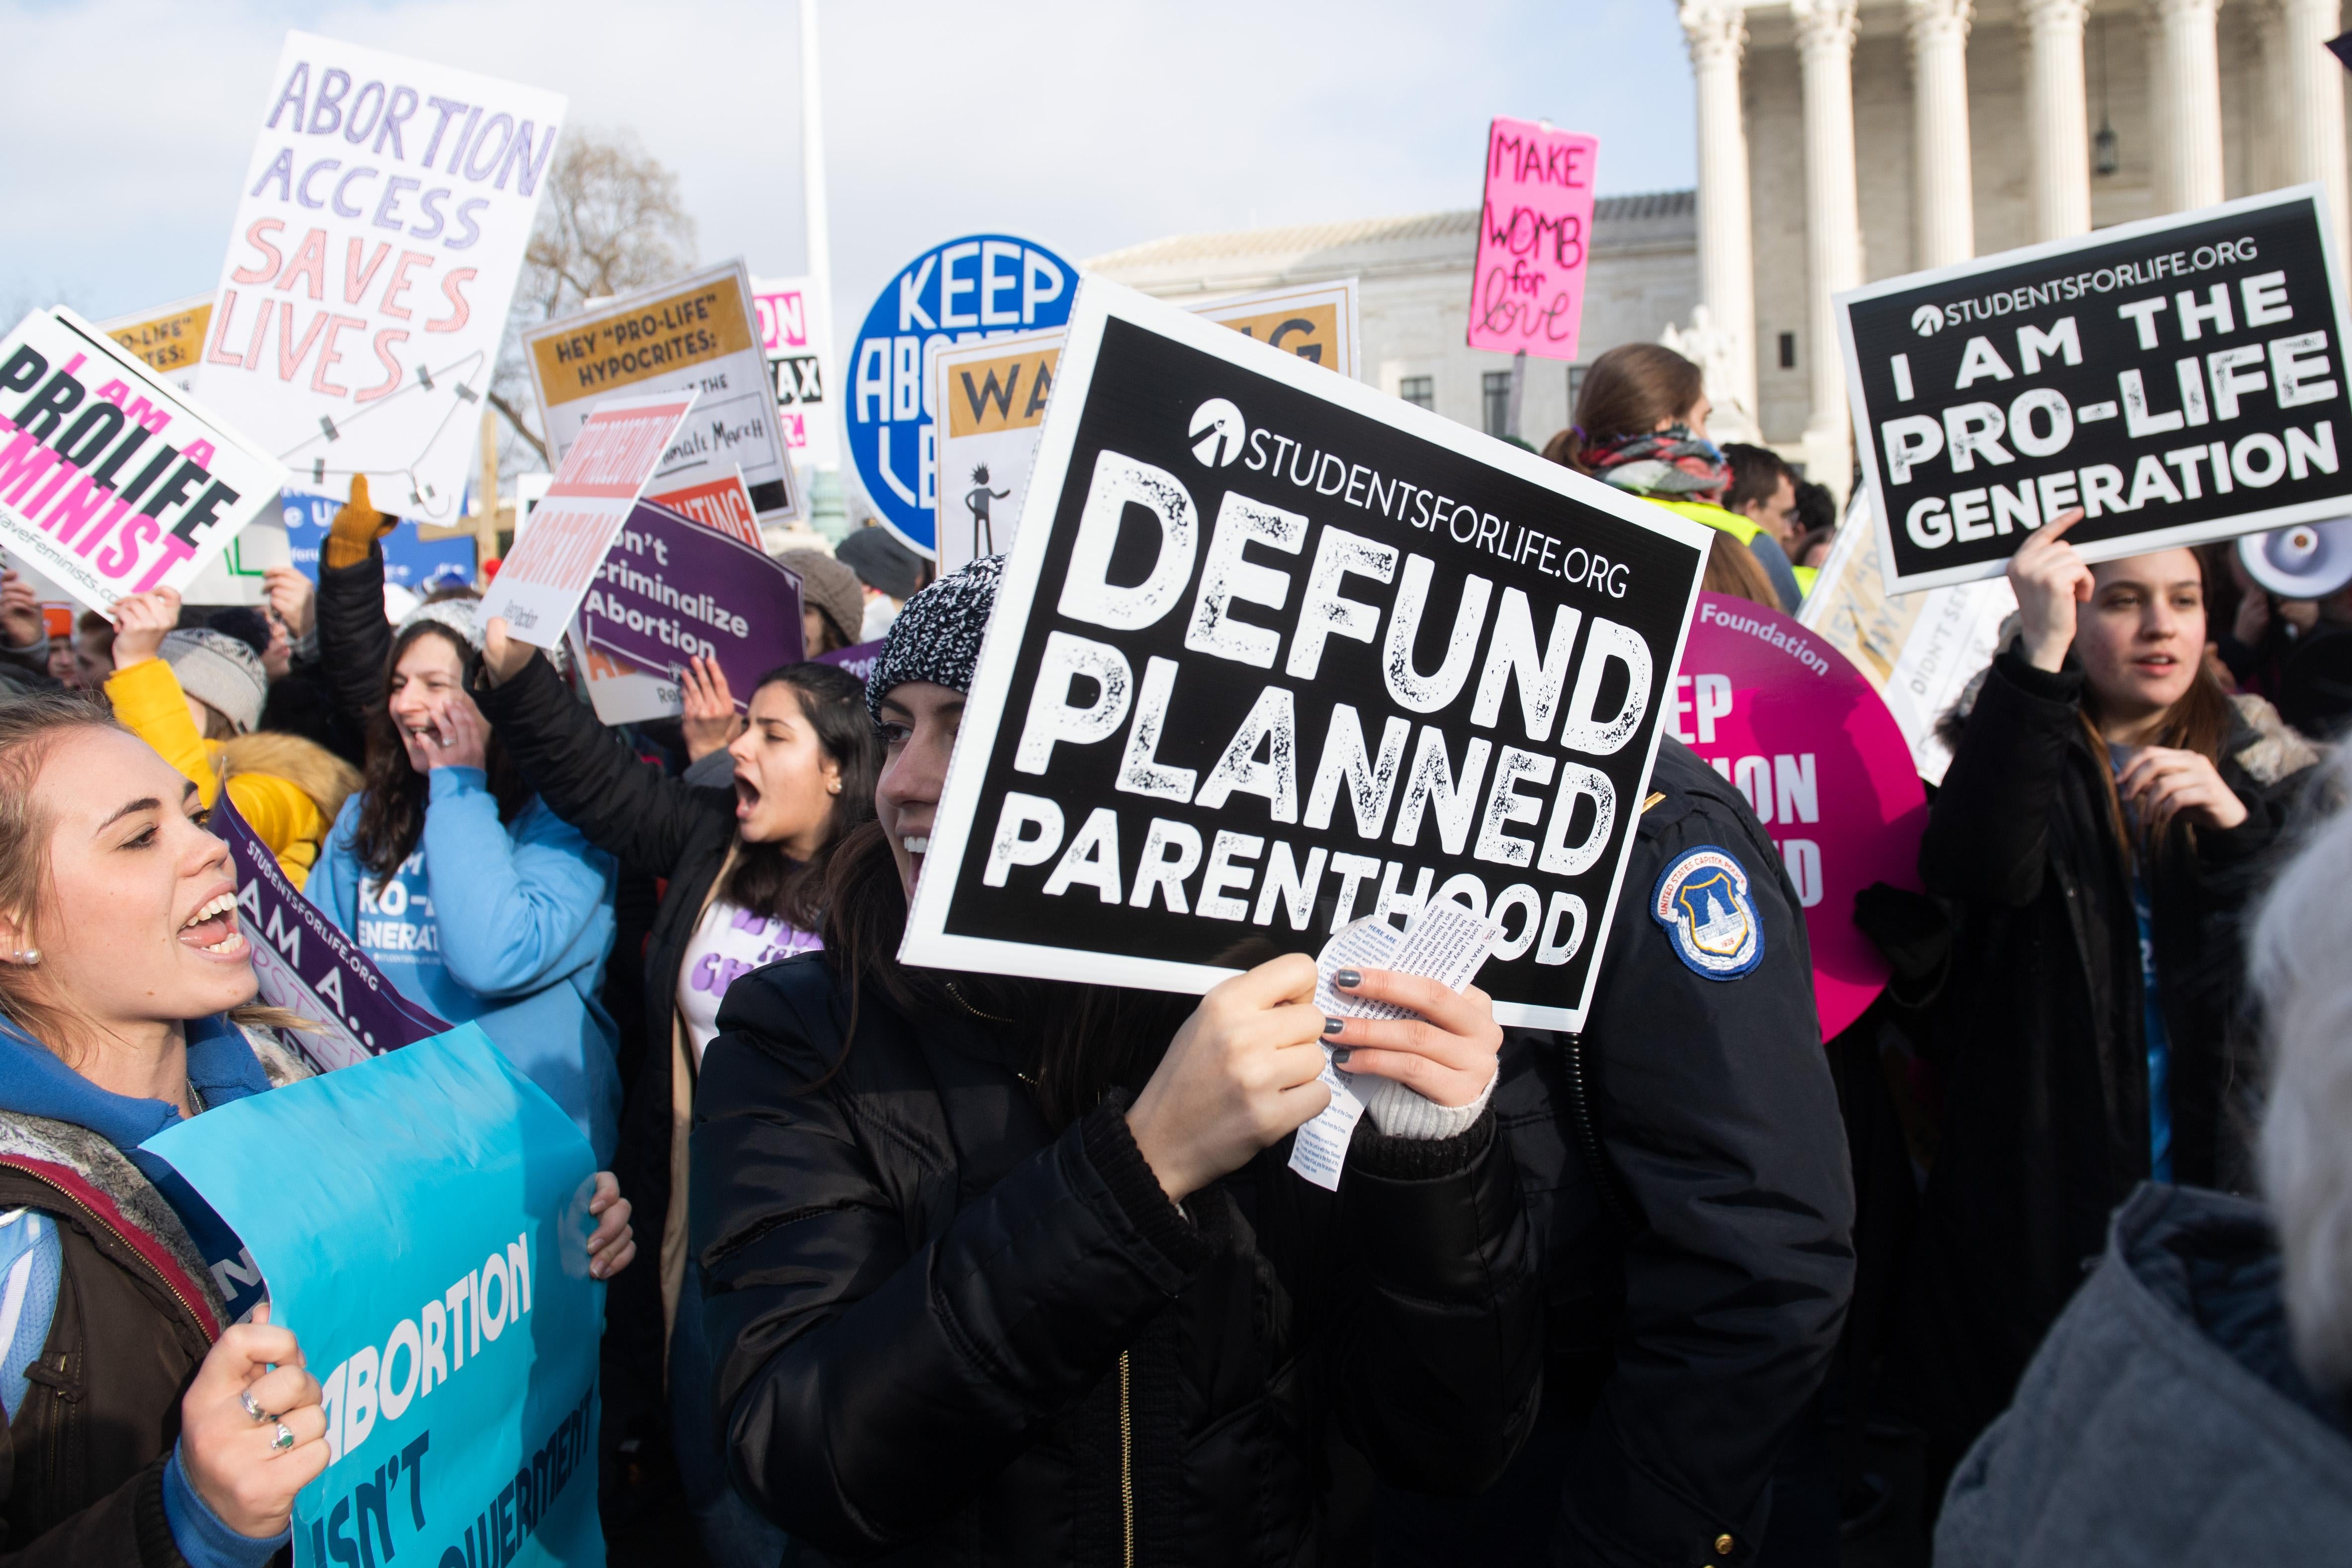 Anti-abortion activists participate in the March for Life, an annual event to mark the anniversary of Roe v. Wade, outside the U.S. Supreme Court in Washington, D.C., on Jan. 18.